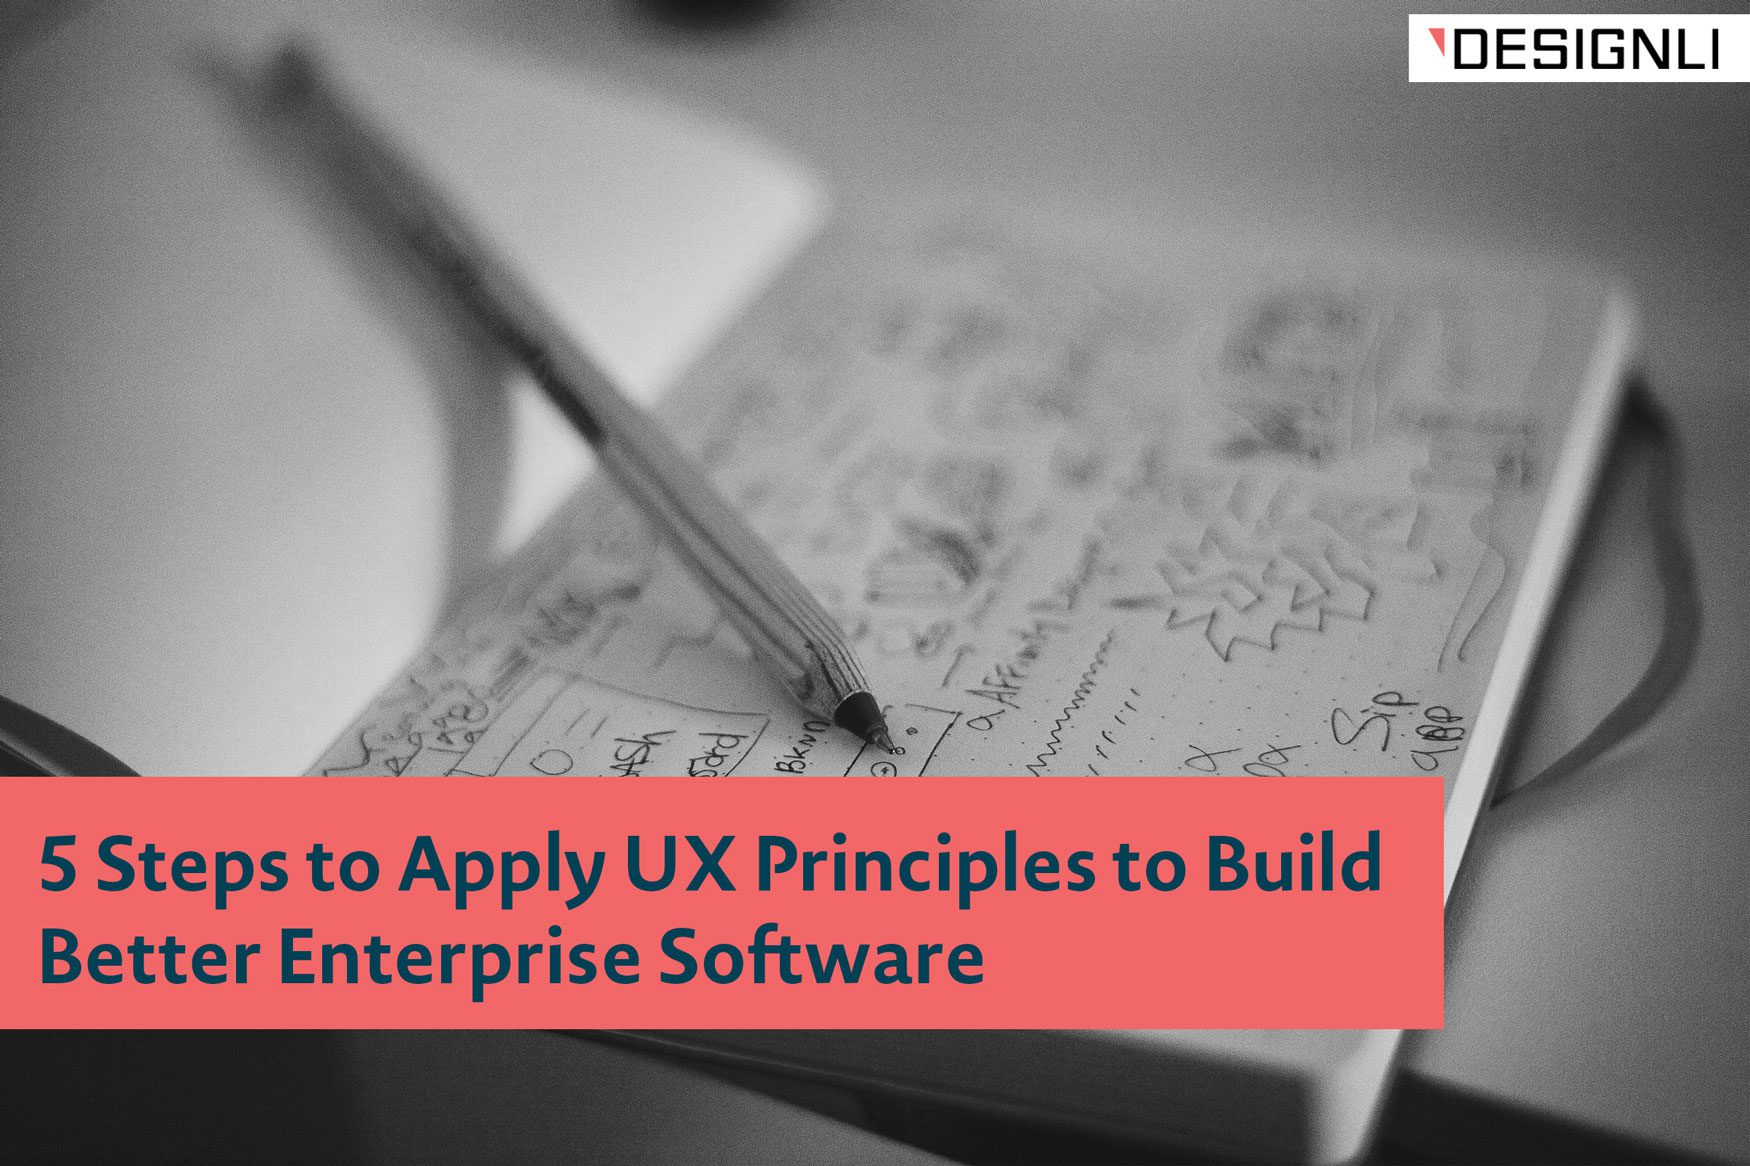 5 Steps to Apply UX Principles to Build Better Enterprise Software